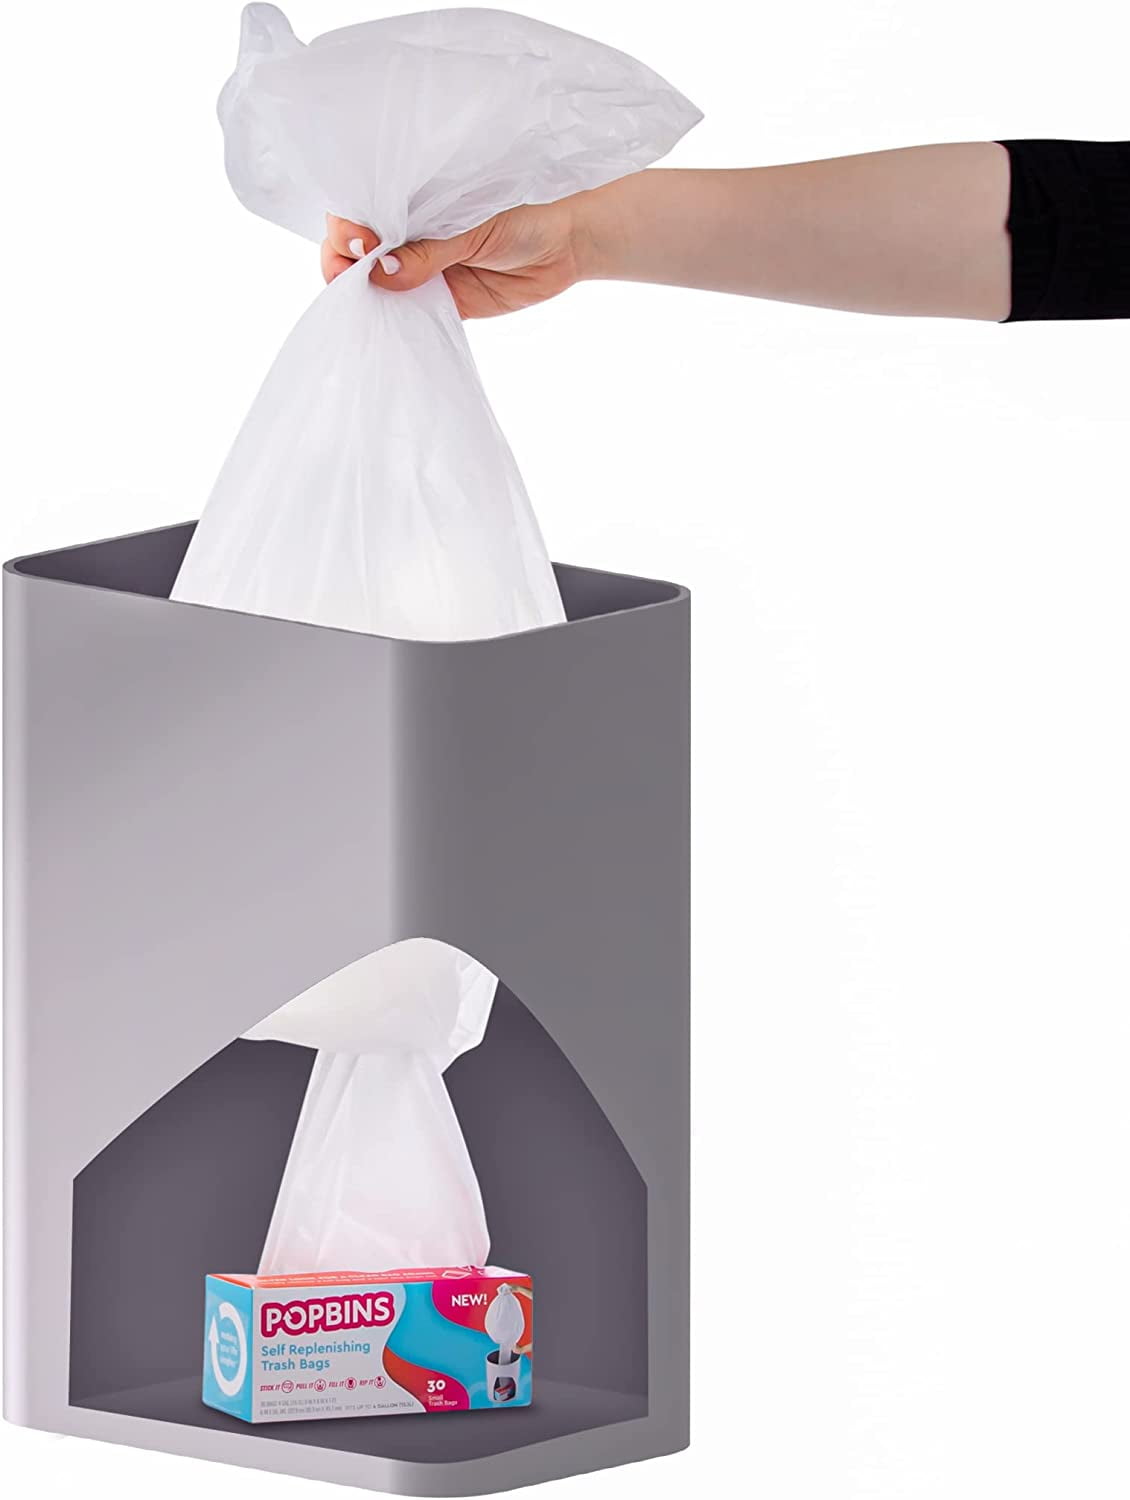 Popbins- Remove One Bag Another One Pops Right In - Clear 4 Gallon Trash  Bag - 30 Count Easily Accessible Small Garbage Bags For Bathroom Trash Can